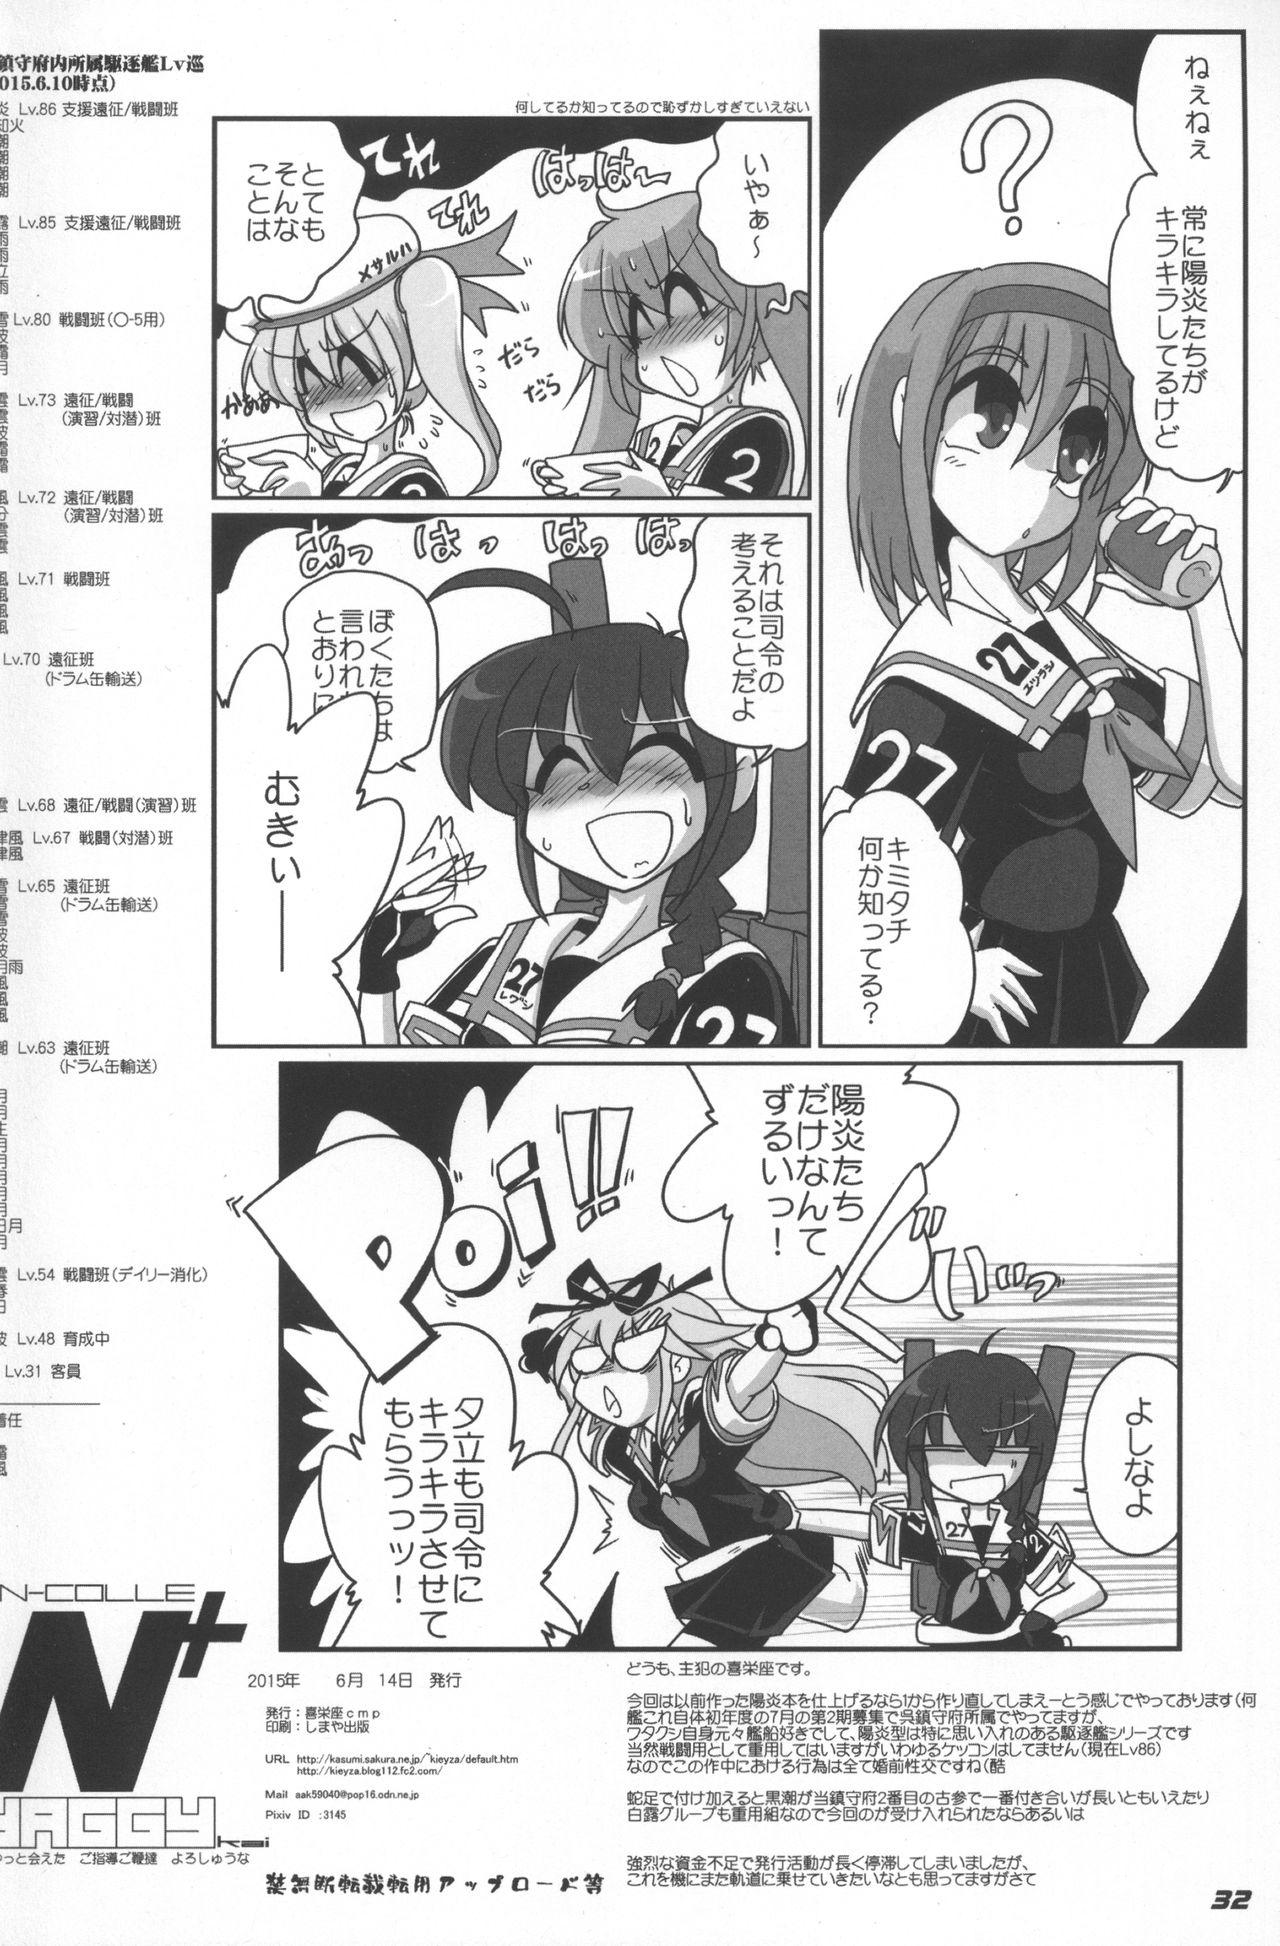 Hot Girls Getting Fucked KAN-COLLE N+ YAGGY kai - Kantai collection Hot Fuck - Page 33